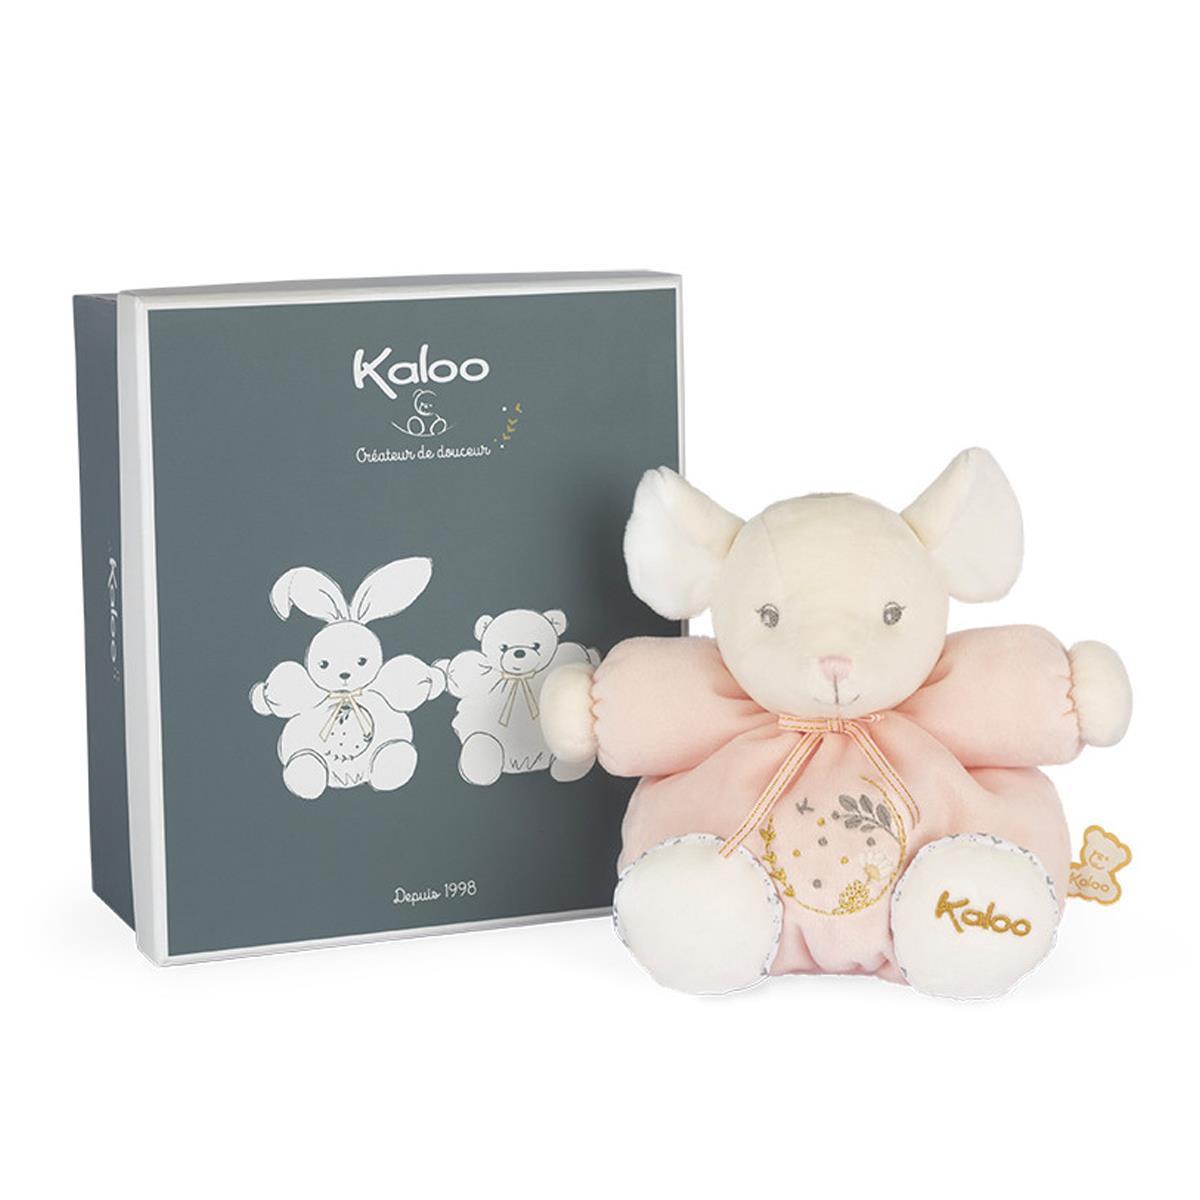 Kaloo Perle Chubby Mouse Small Pink Soft Toy